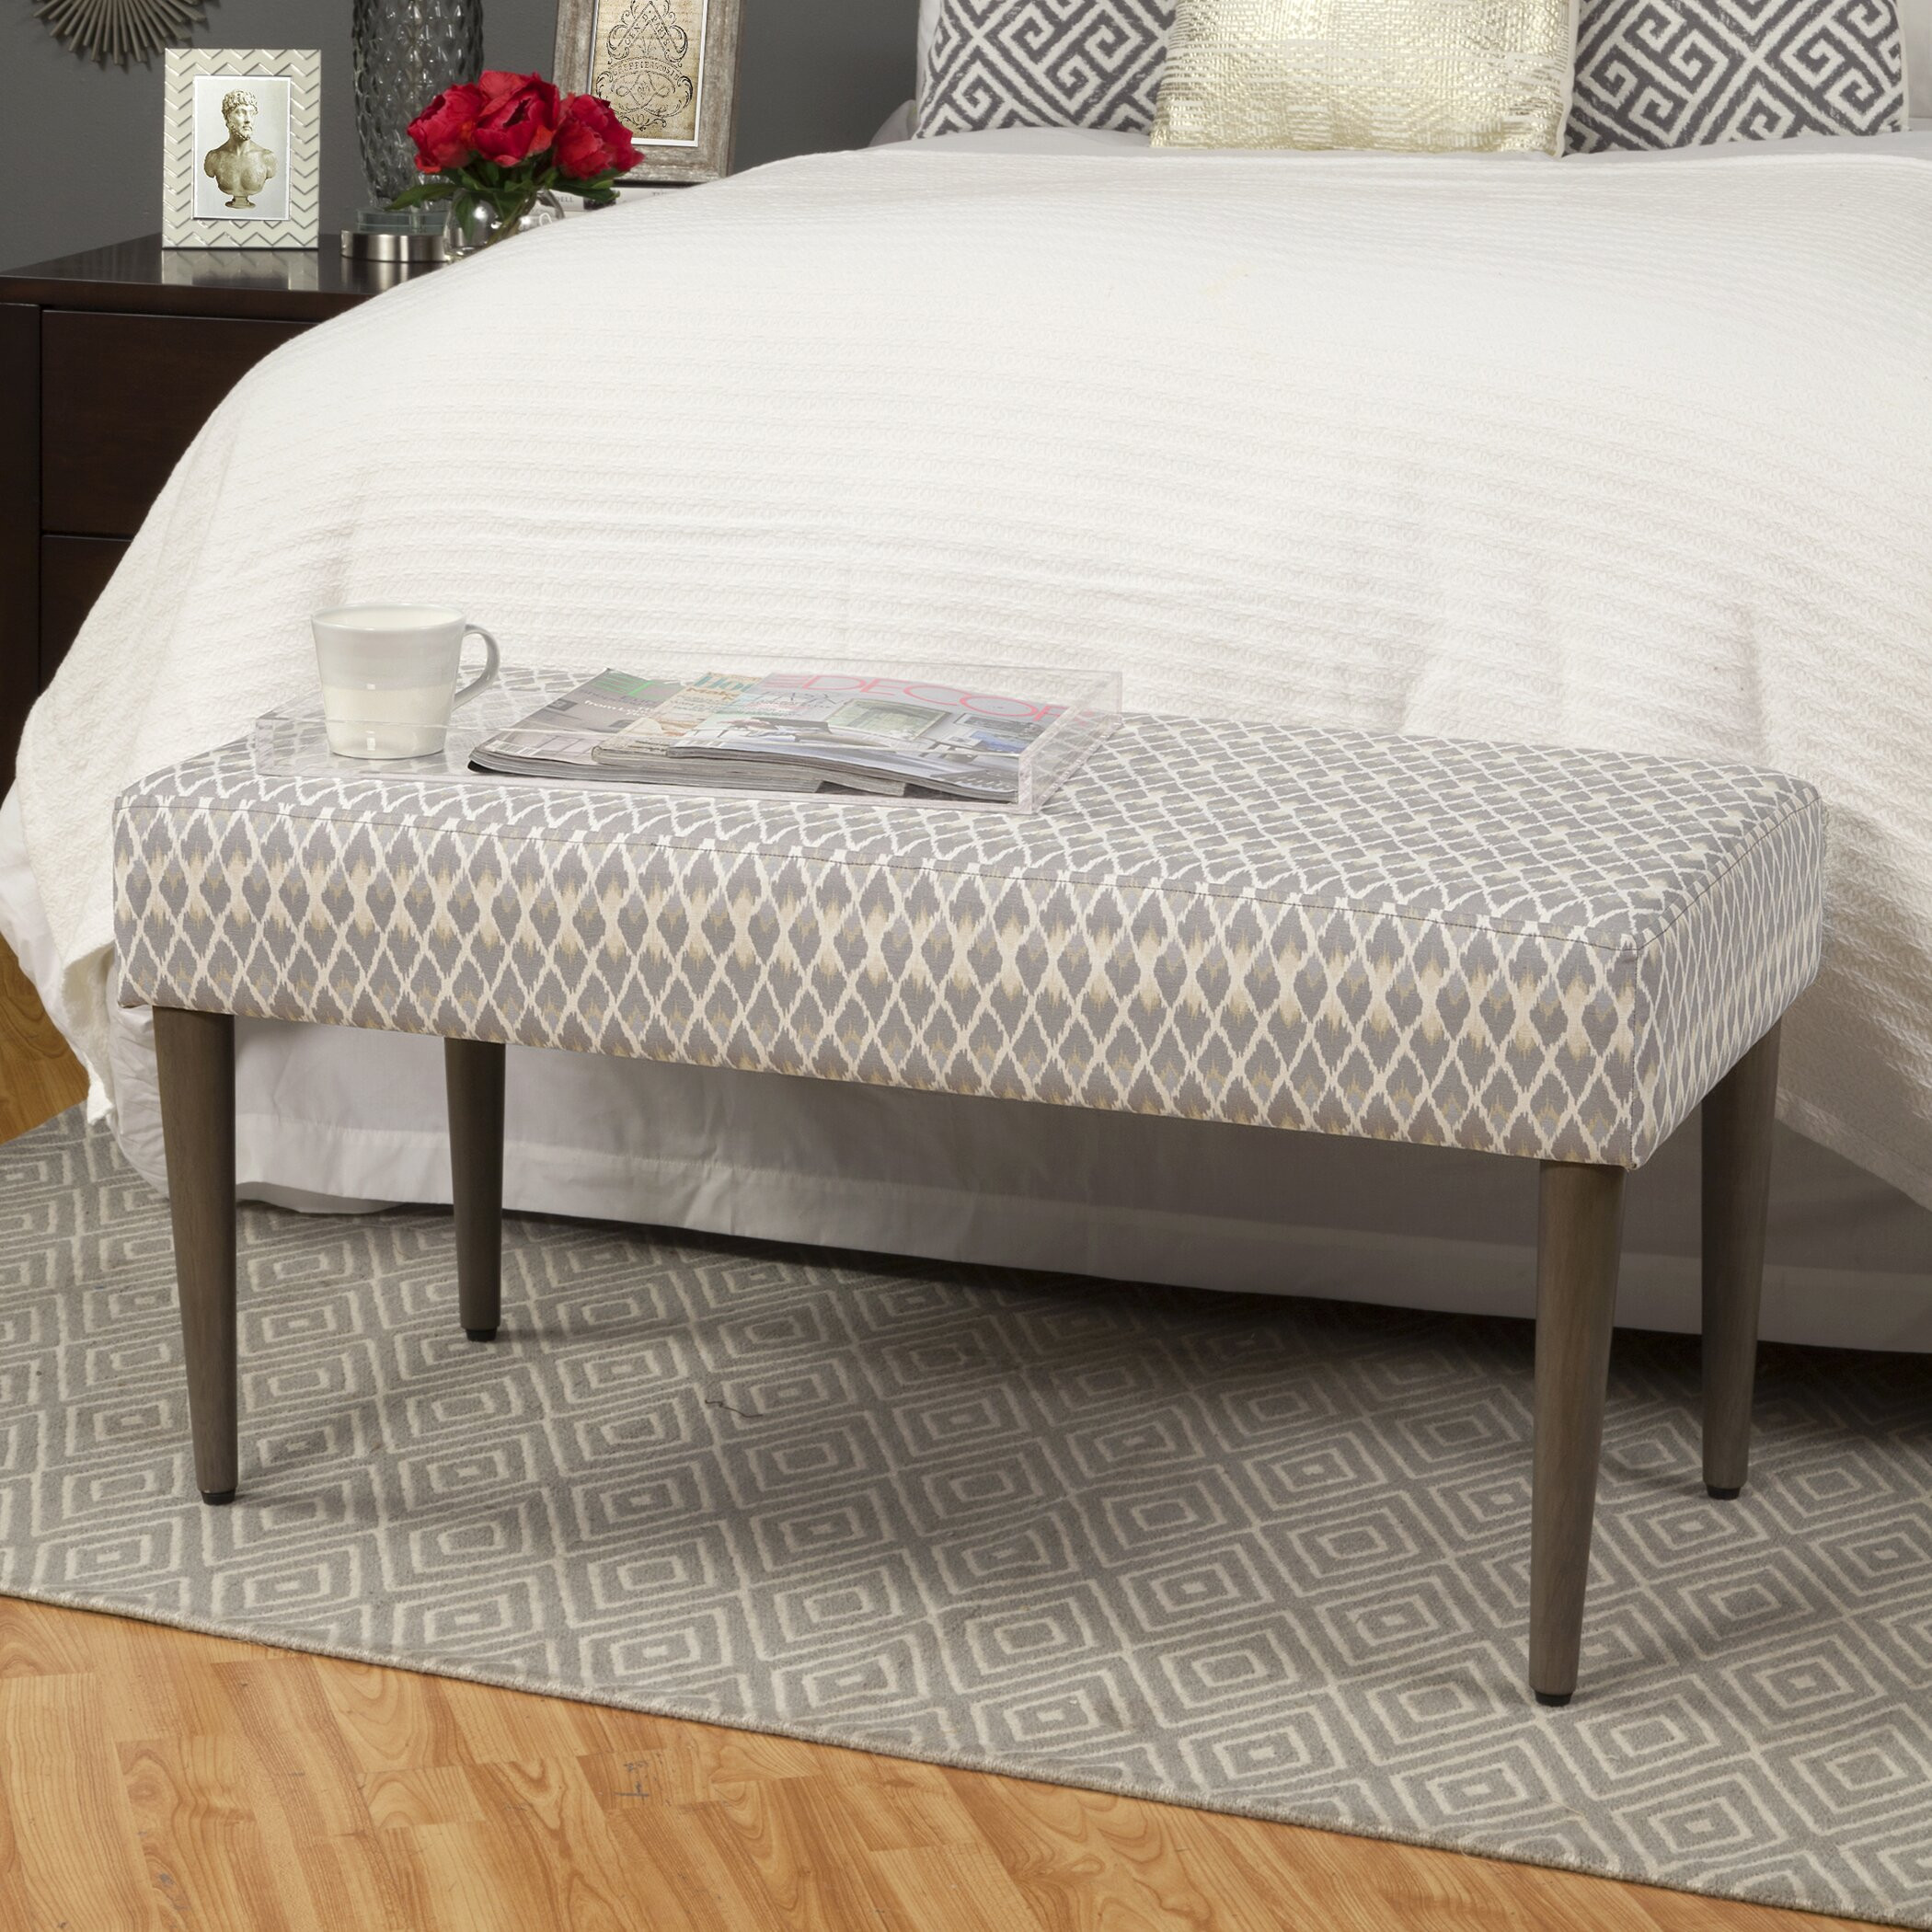 Storage Bed Benches
 Upholstered Bedroom Bench